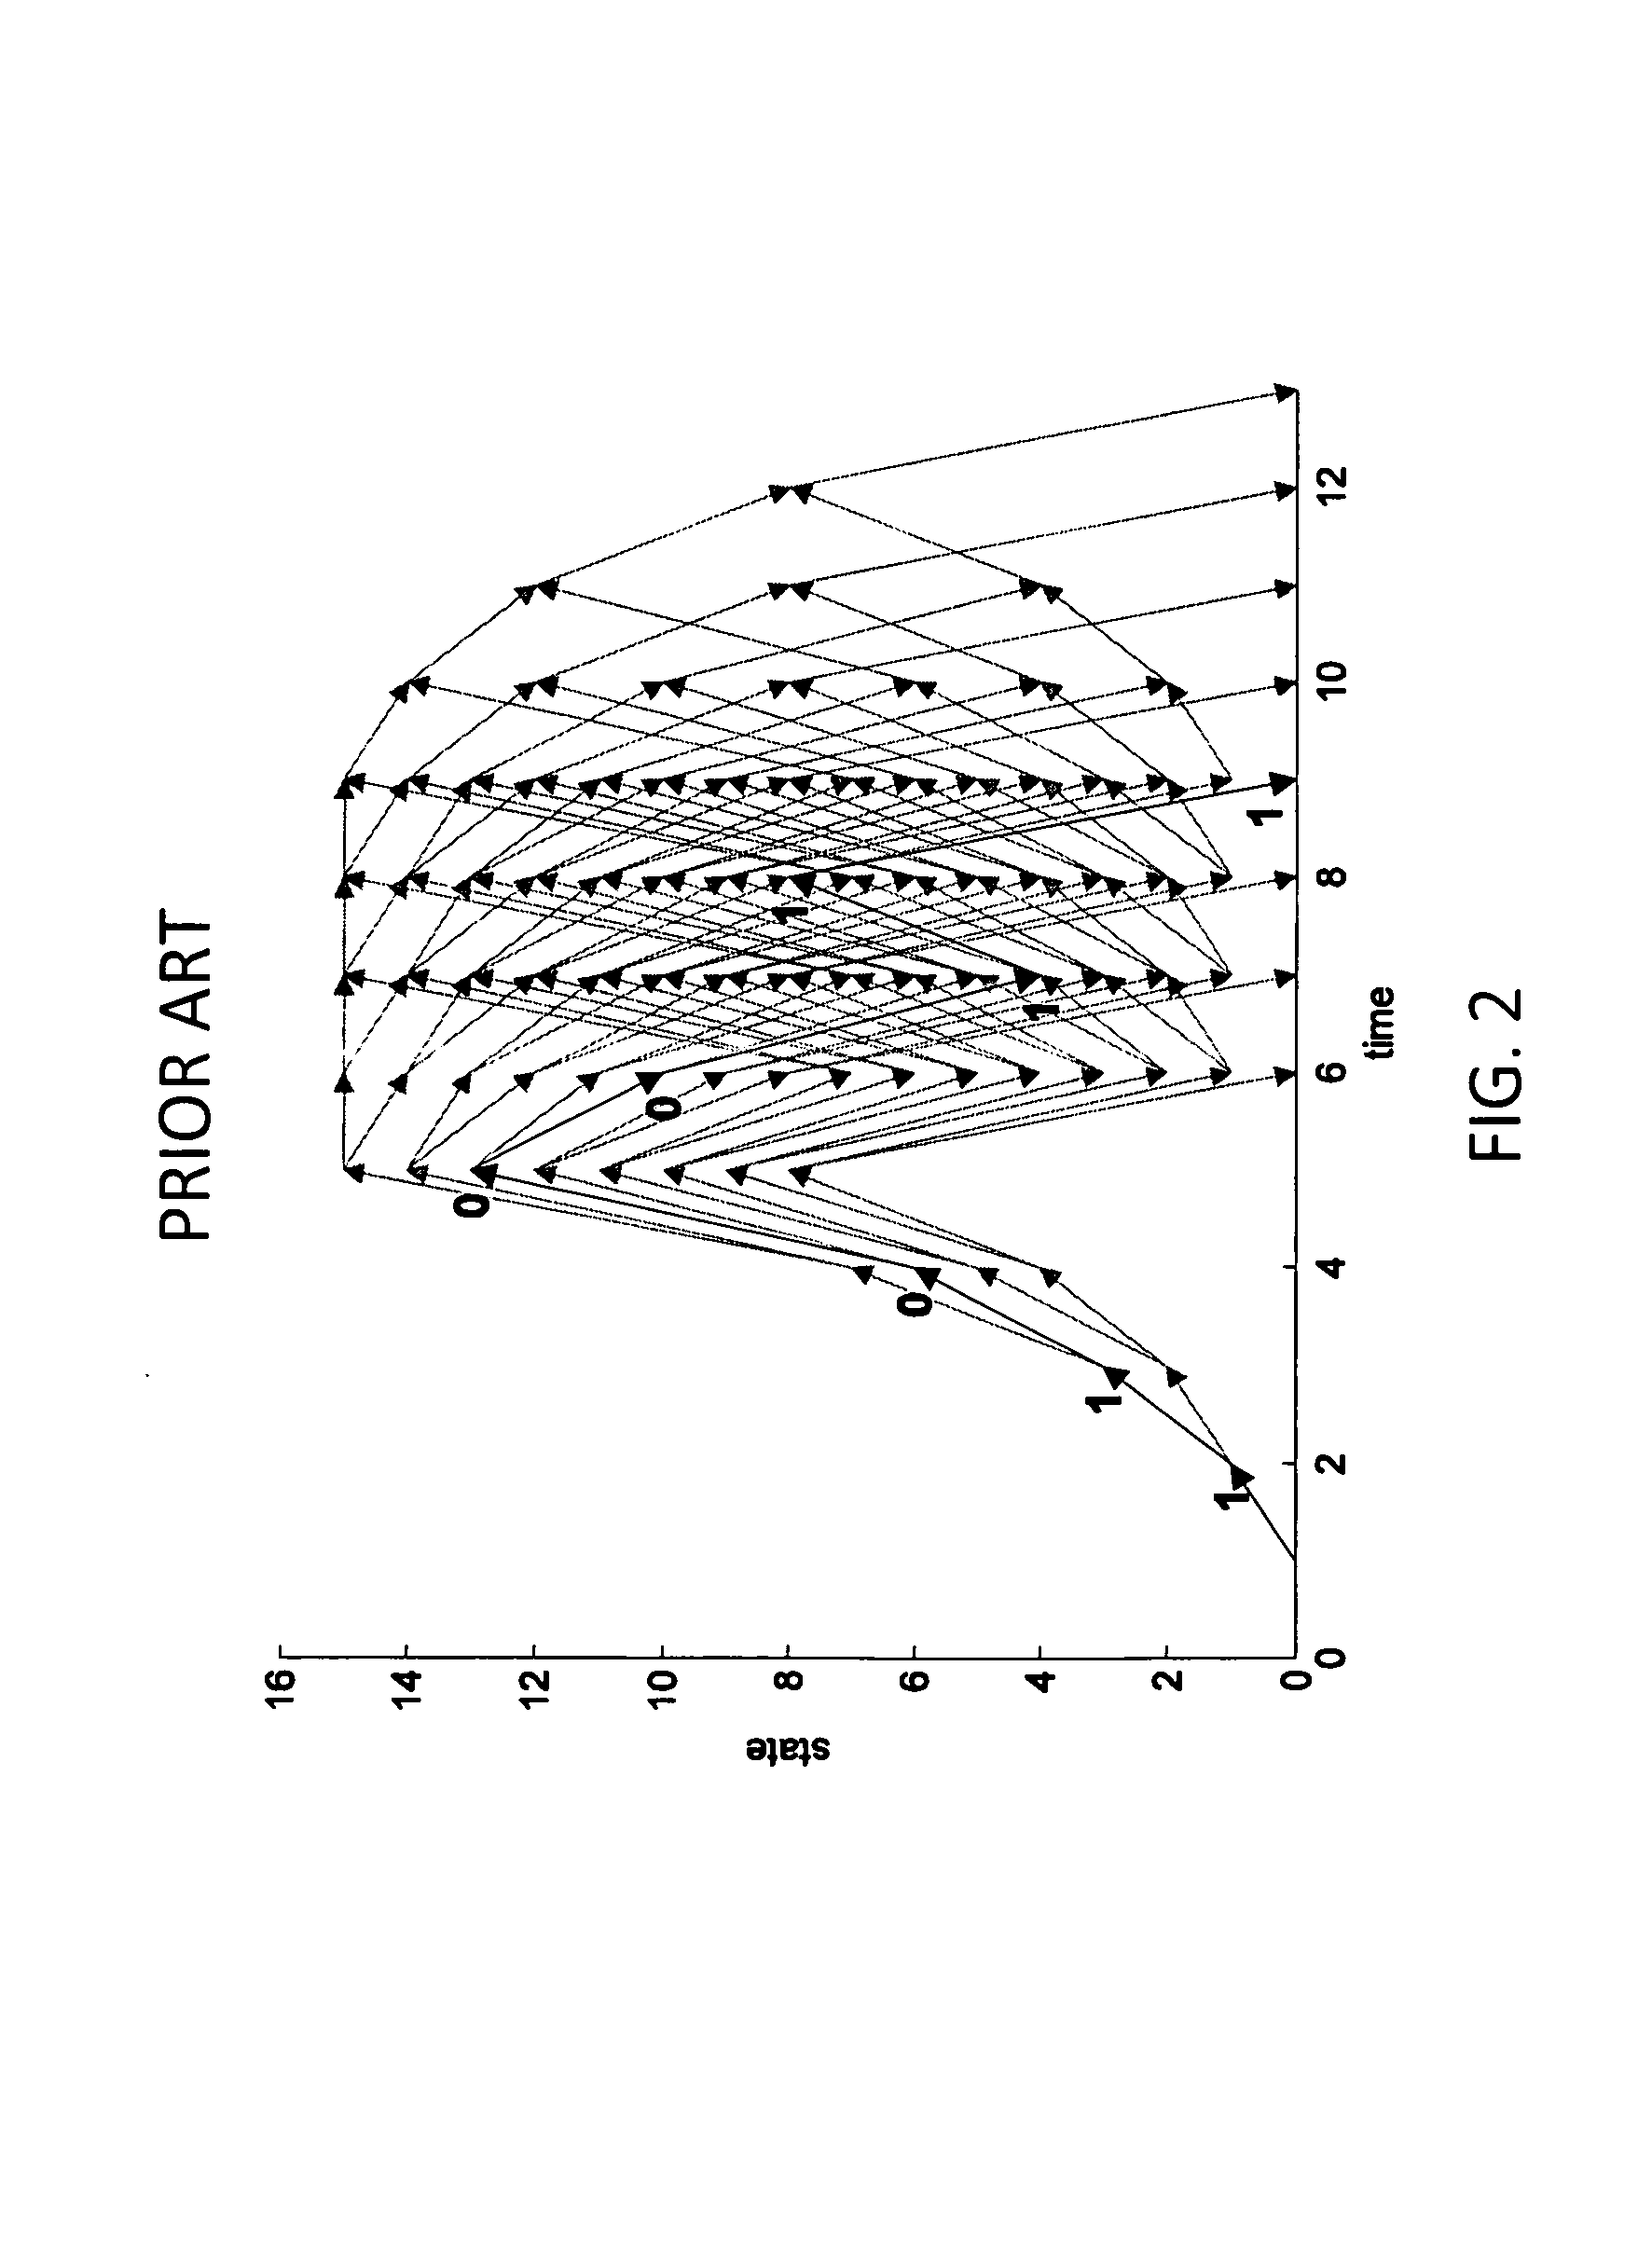 Method and apparatus for transmitting and receiving convolutionally coded data for use with combined binary phase shift keying (BPSK) modulation and pulse position modulation (PPM)